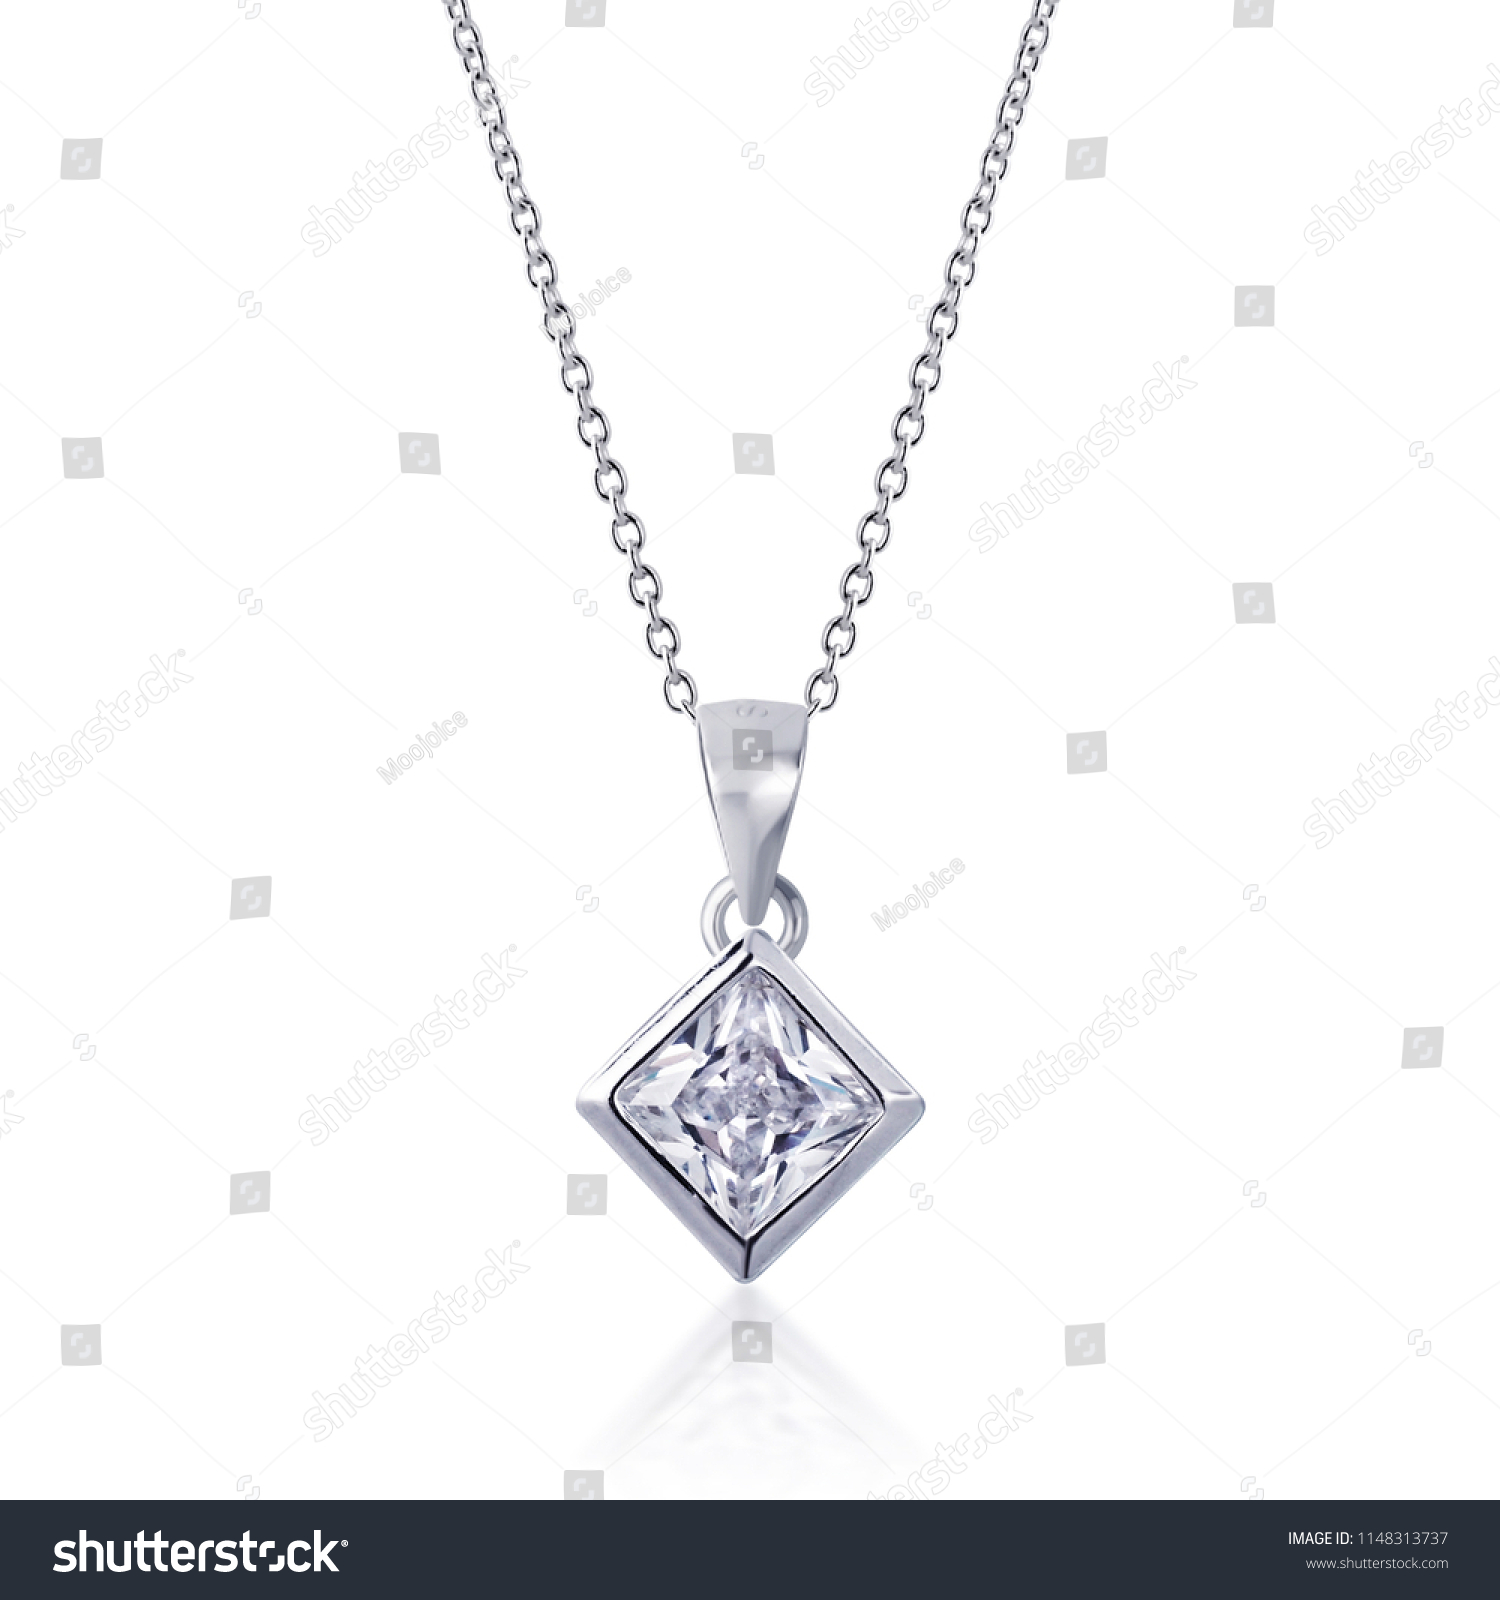 diamond Pendant with necklace on white background #1148313737